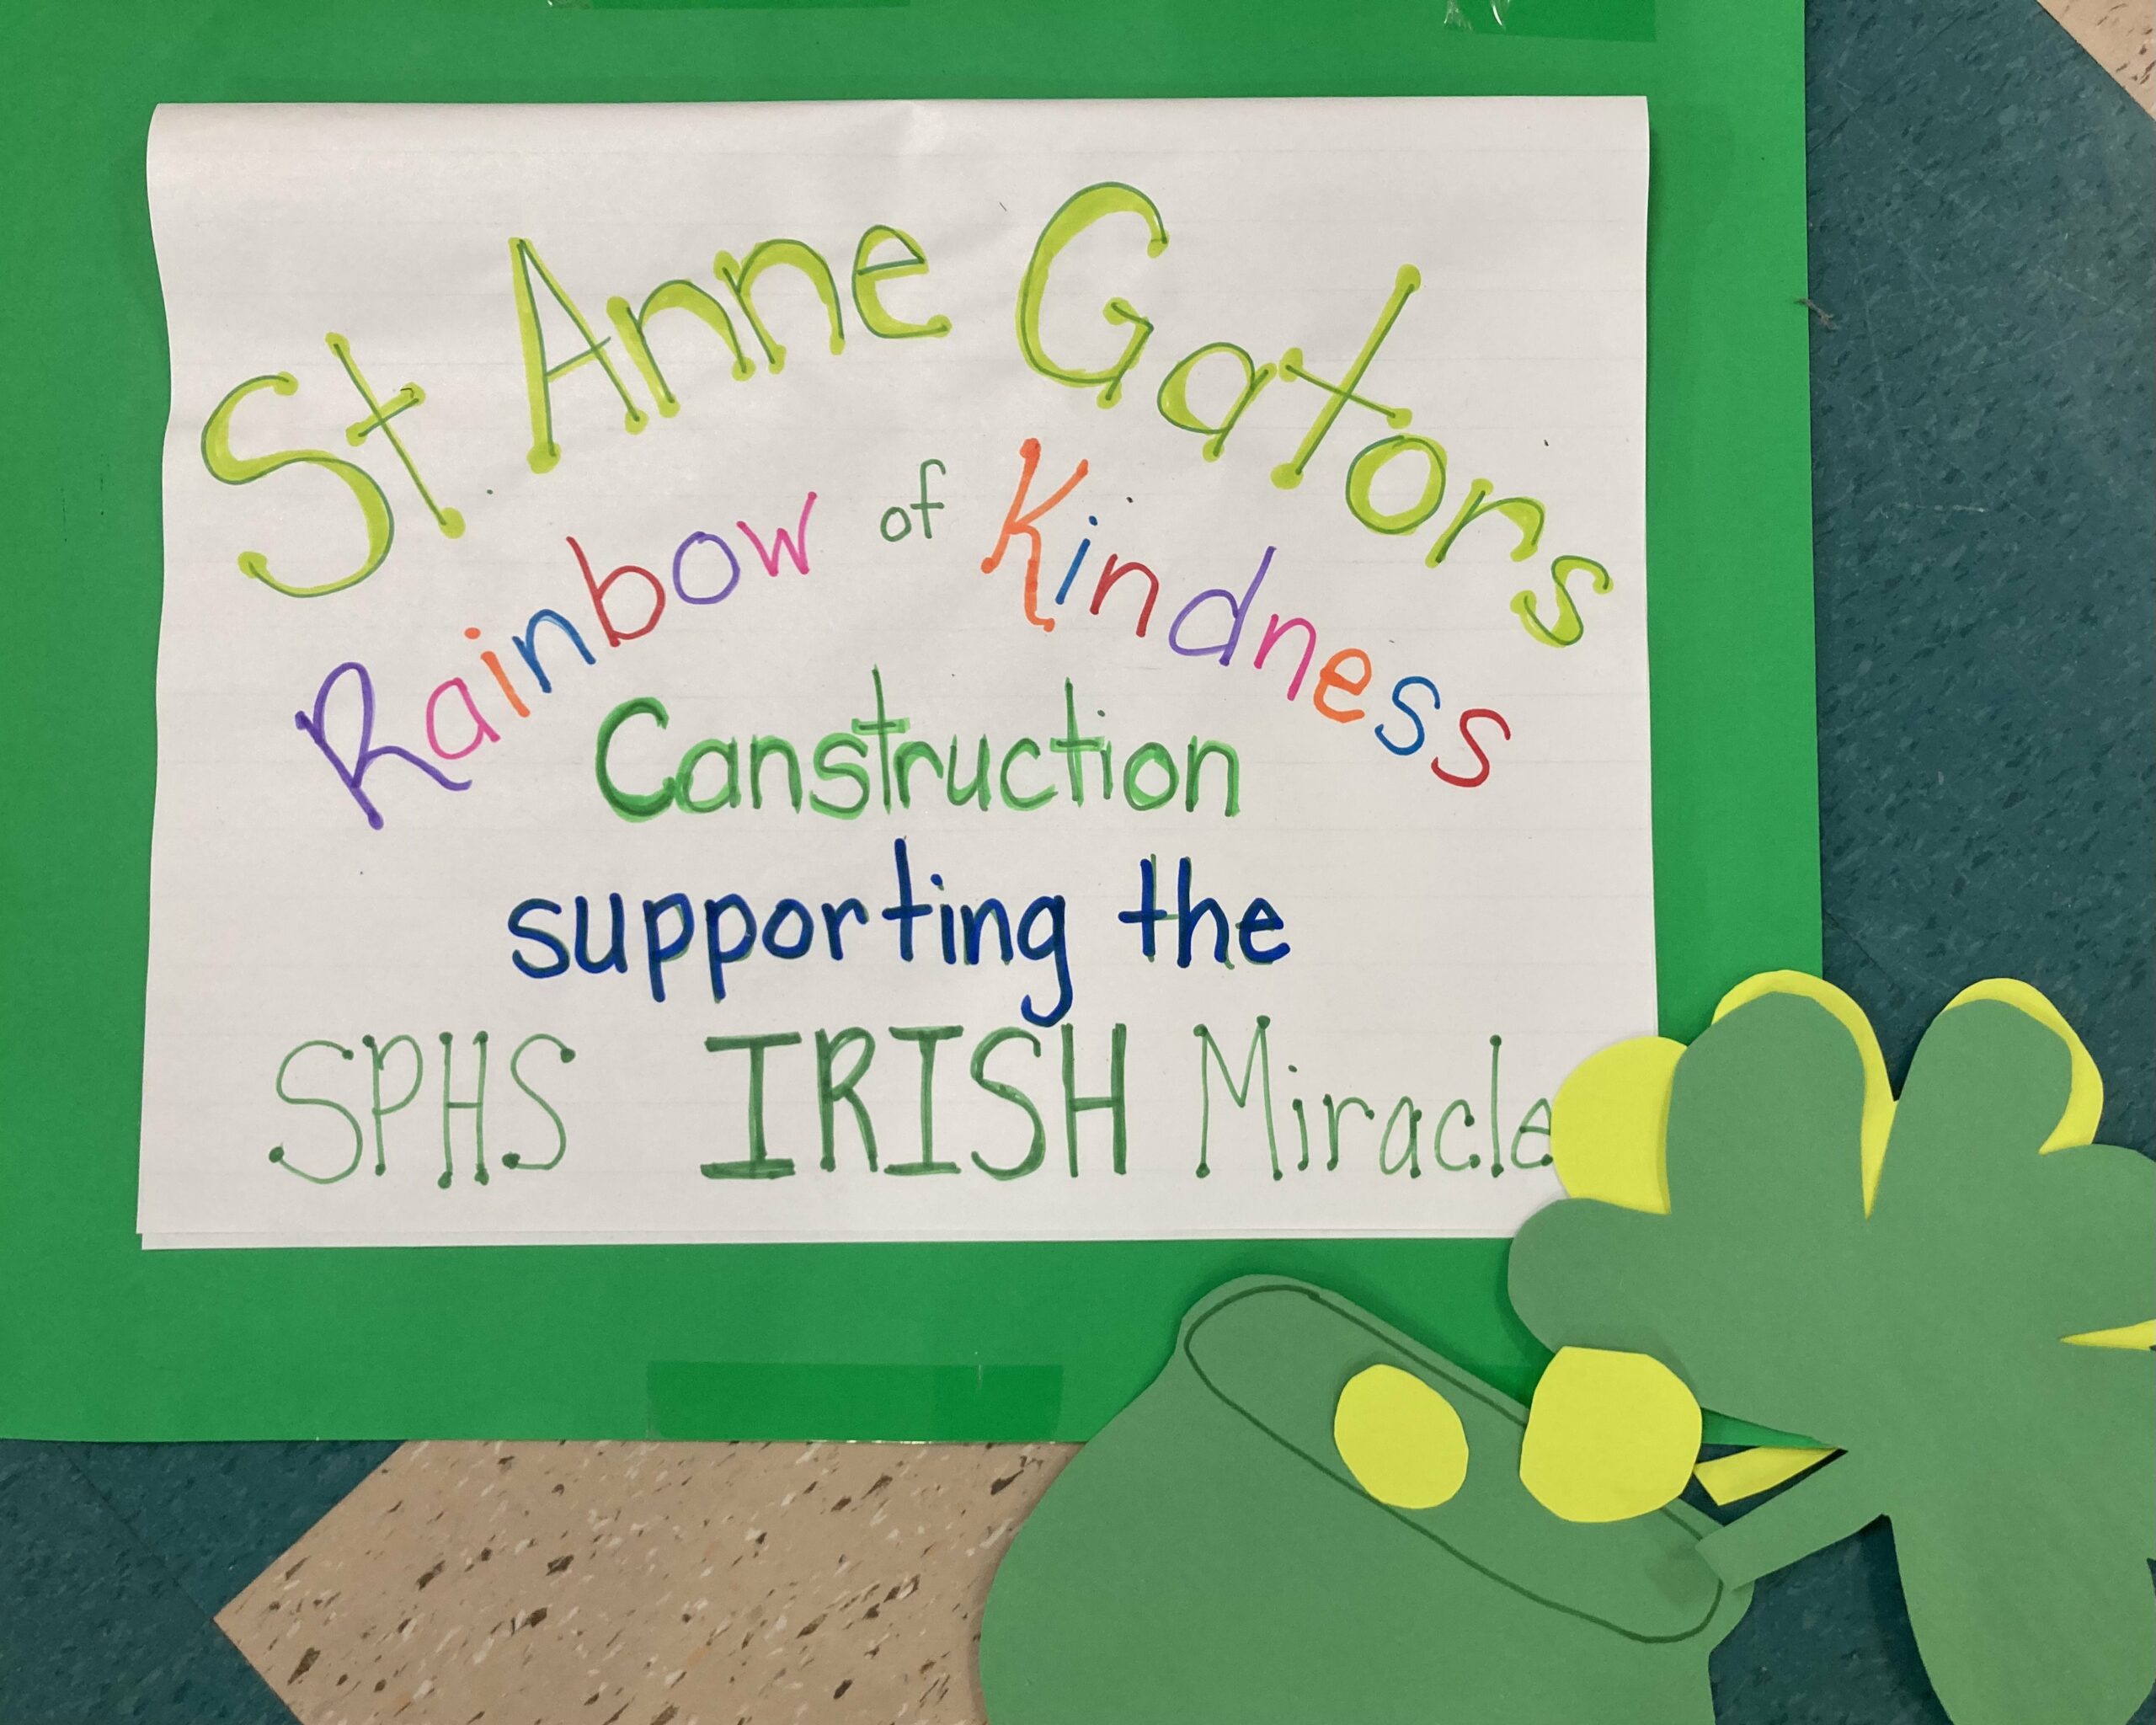 St. Anne Gators Collect More Than 800 Pounds of Food for Irish Miracle